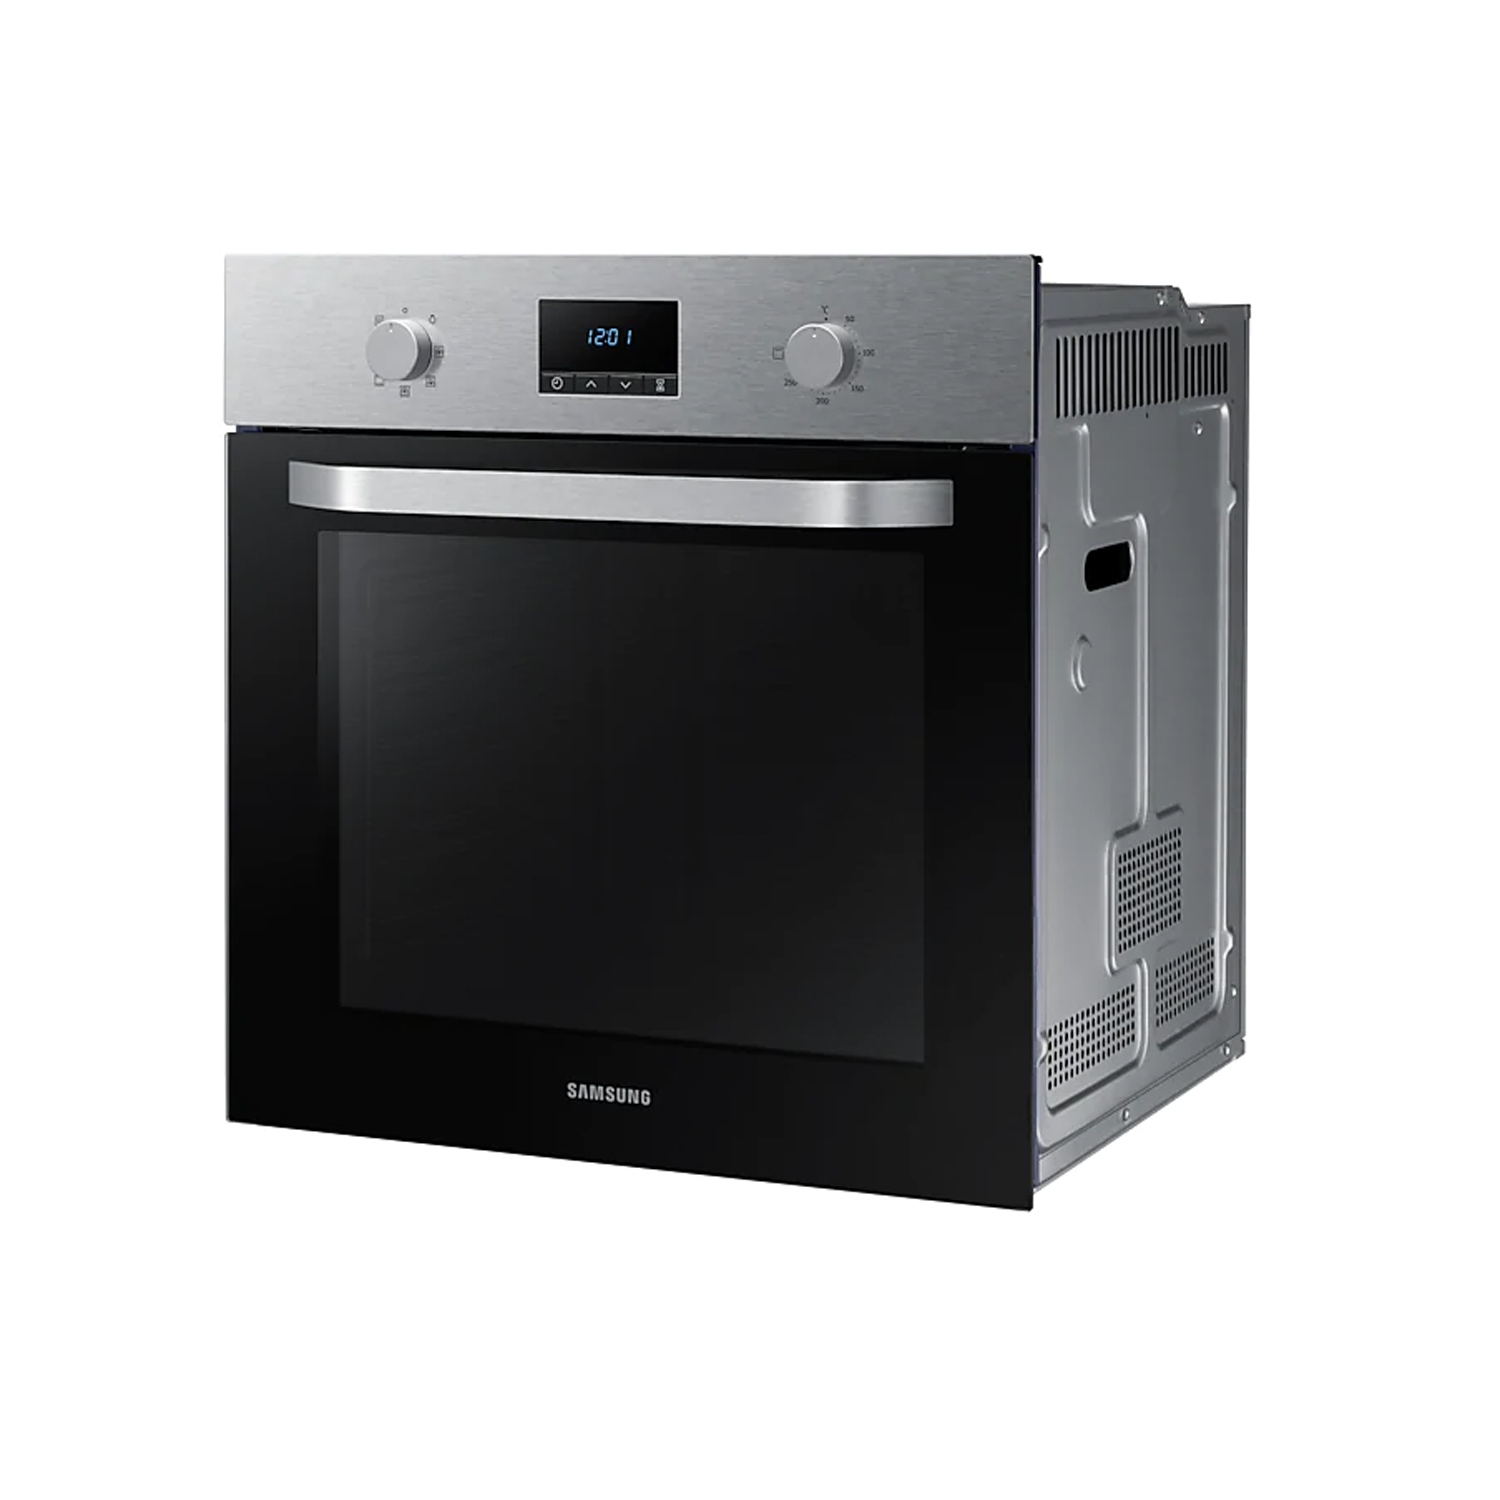 Samsung Built In Electric Single Oven - Stainless Steel - A Rated - 4